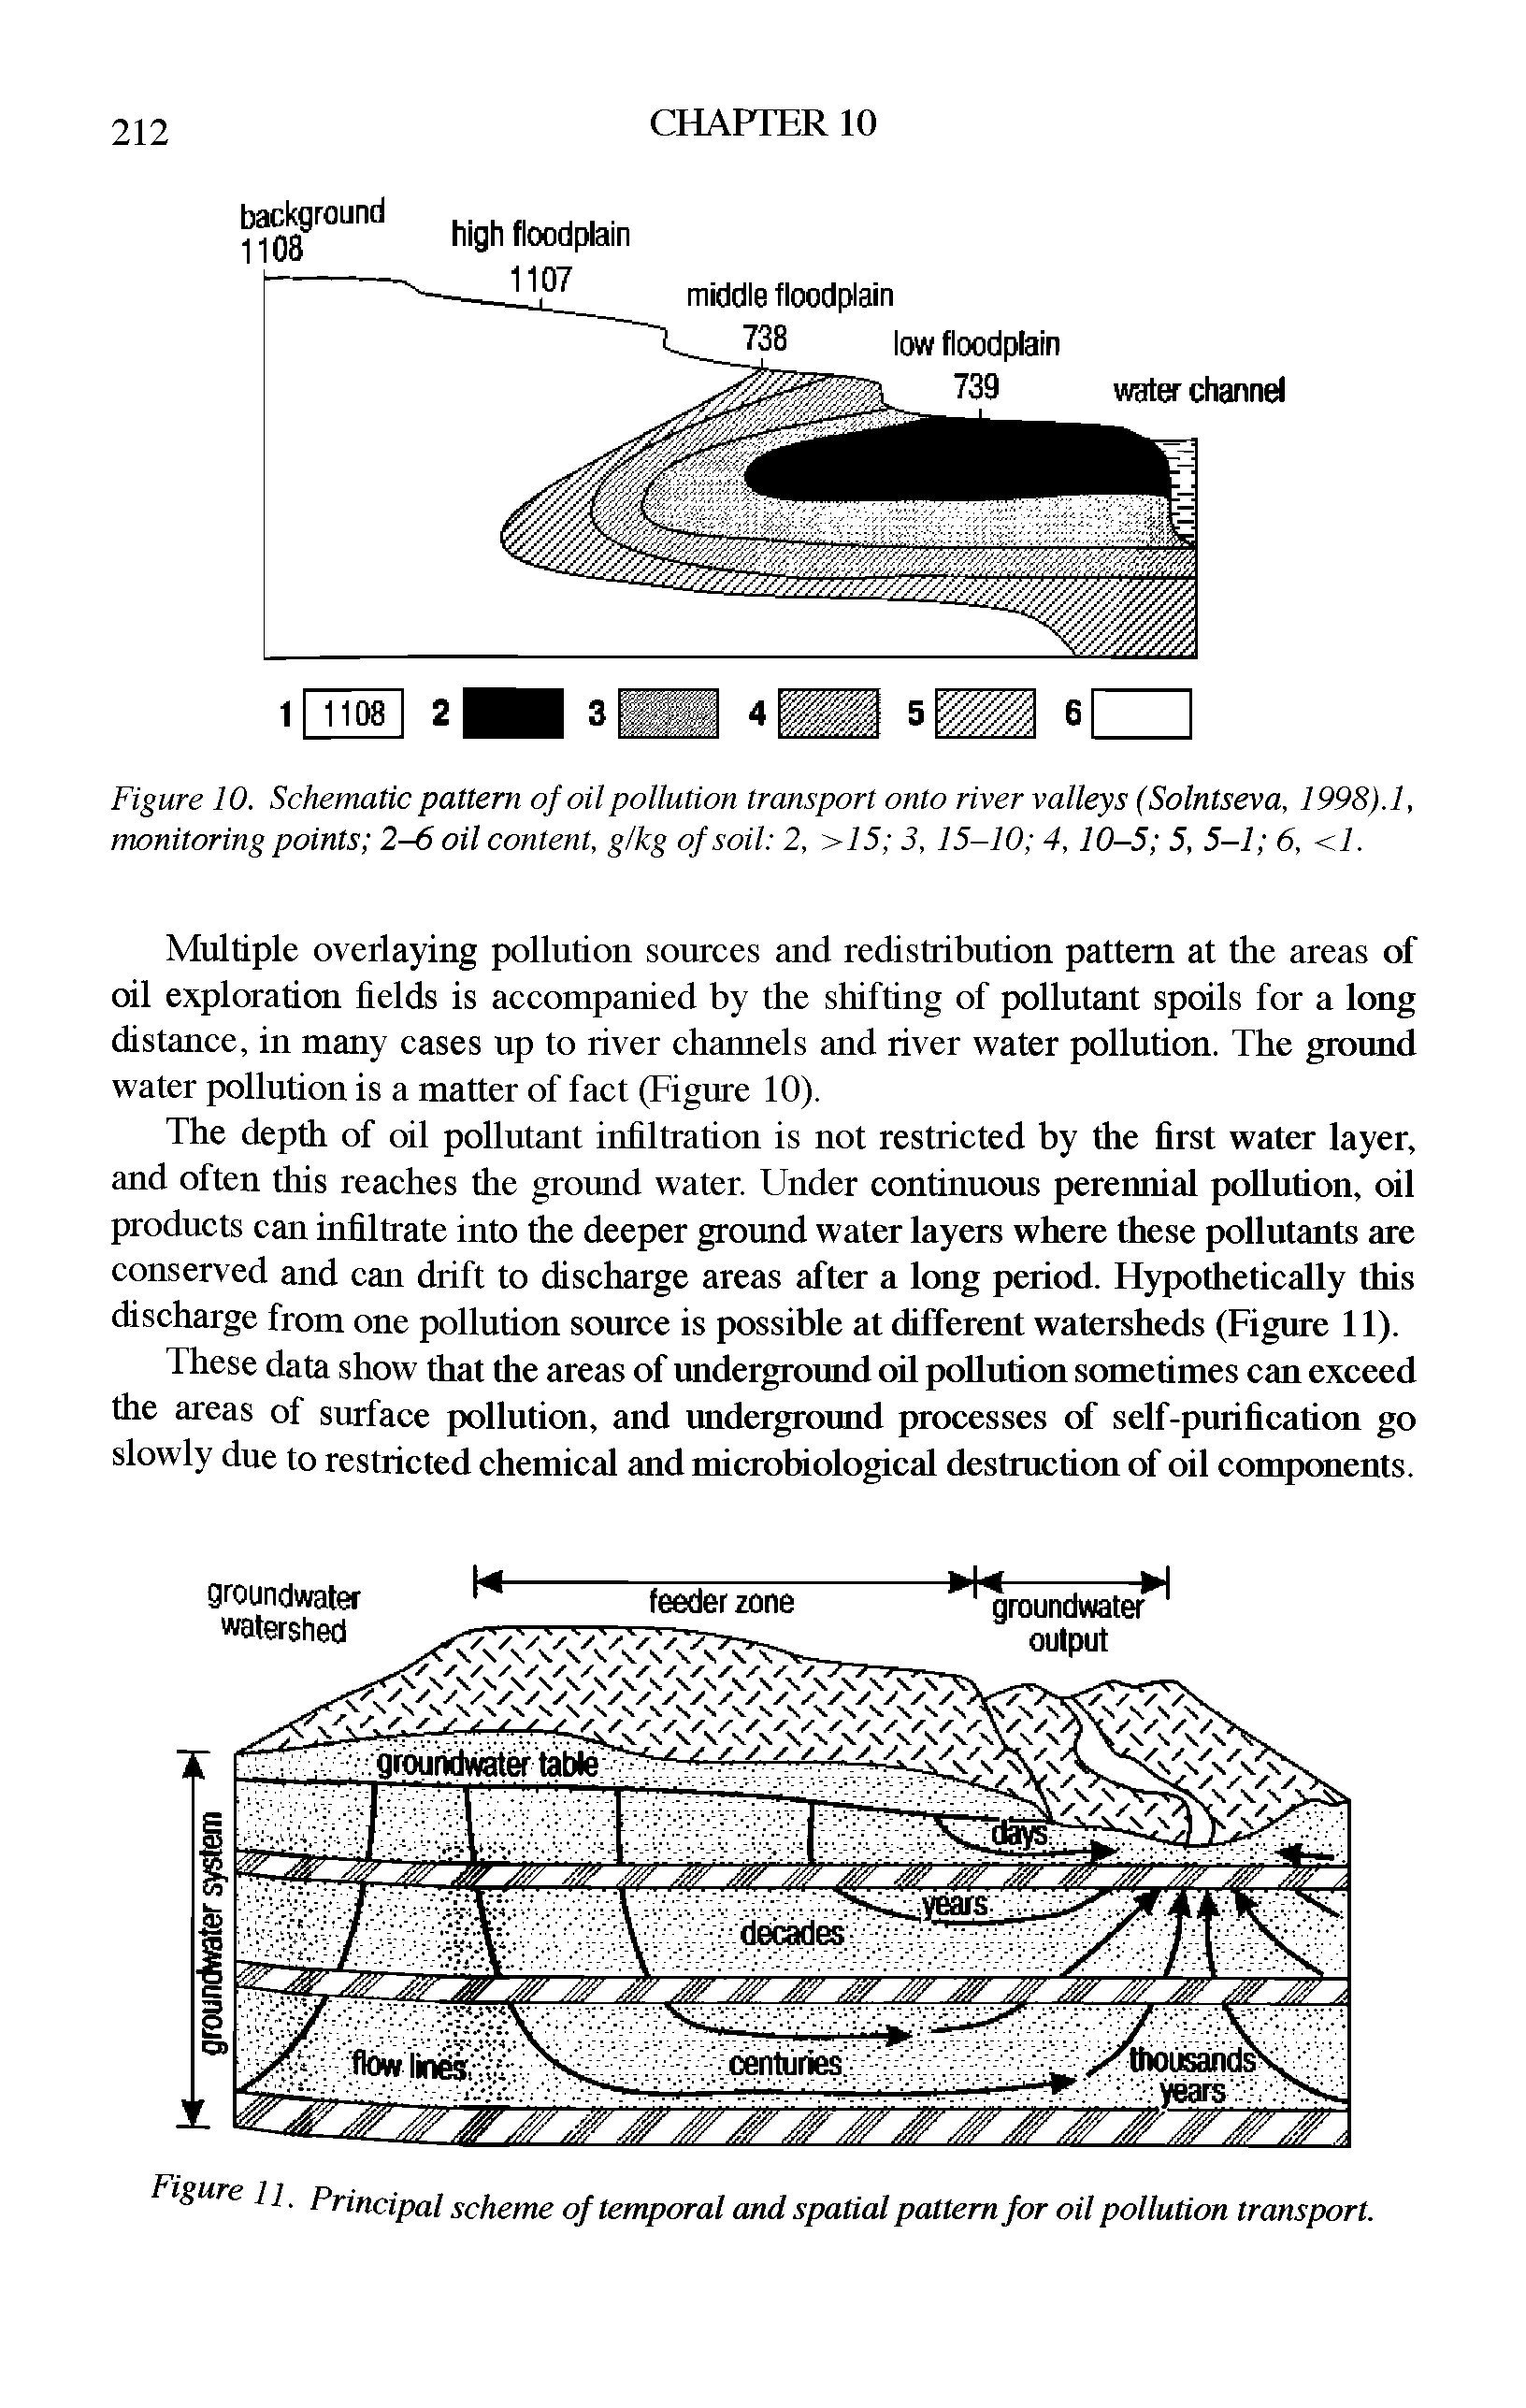 Figure 10. Schematic pattern of oil pollution transport onto river valleys (Solntseva, 1998).1, monitoring points 2-6 oil content, g/kg of soil 2, >15 3, 15-10 4, 10-5 5, 5—1 6, <1.